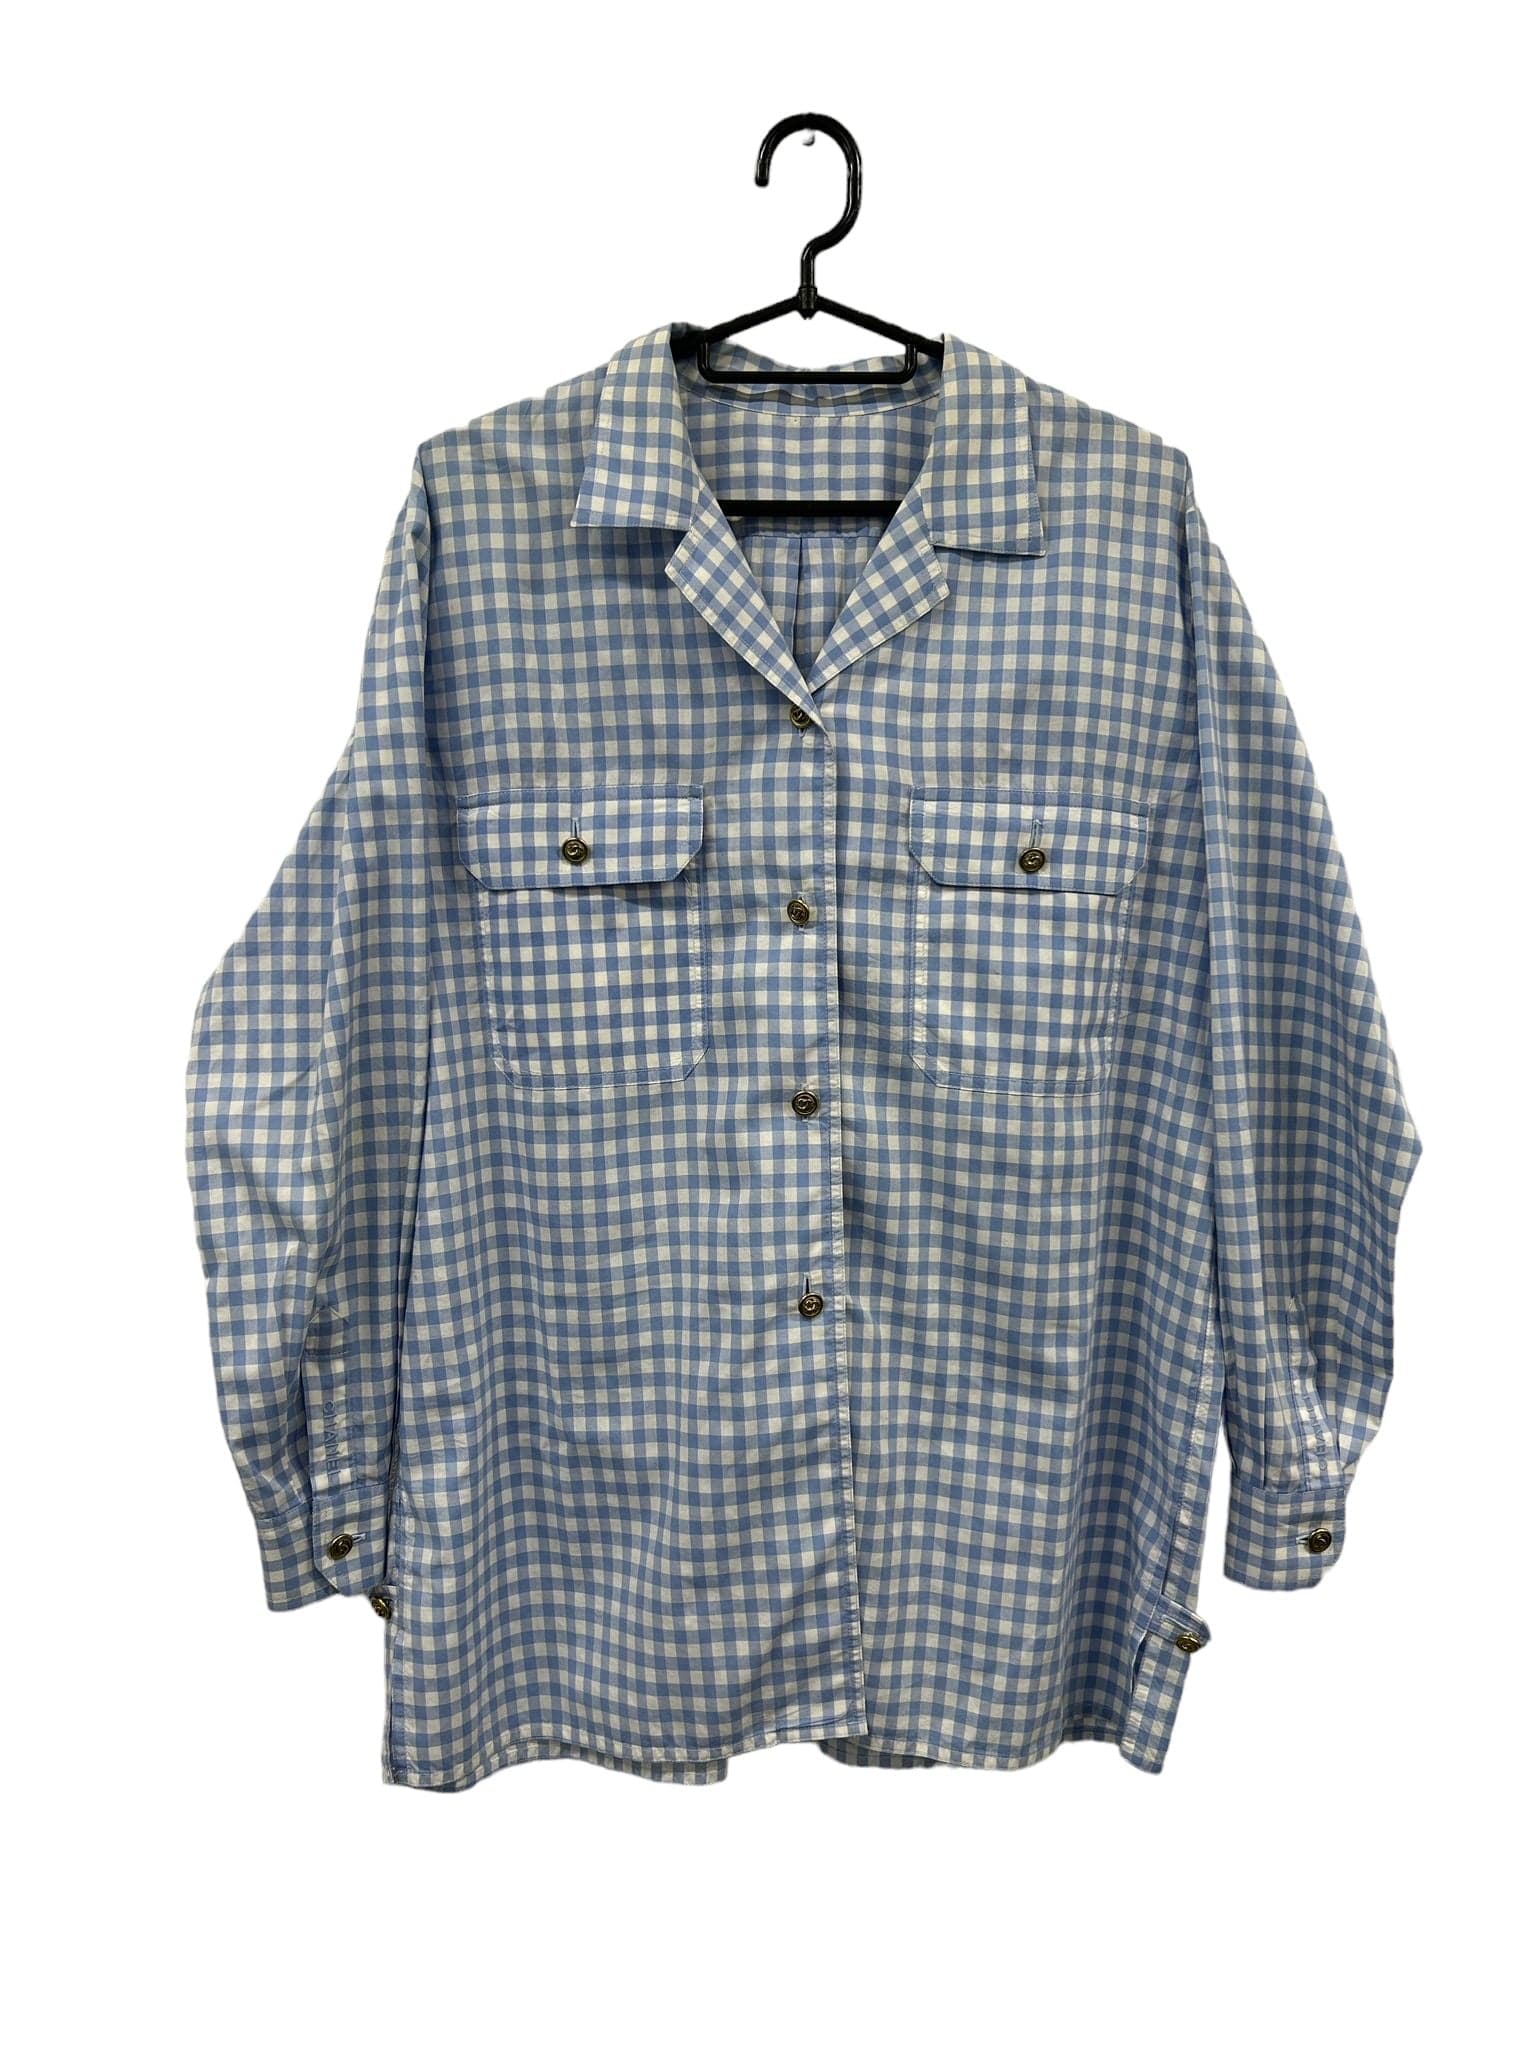 Chanel Chanel Gingham Check Button up Shirt Blue AVCSC1112